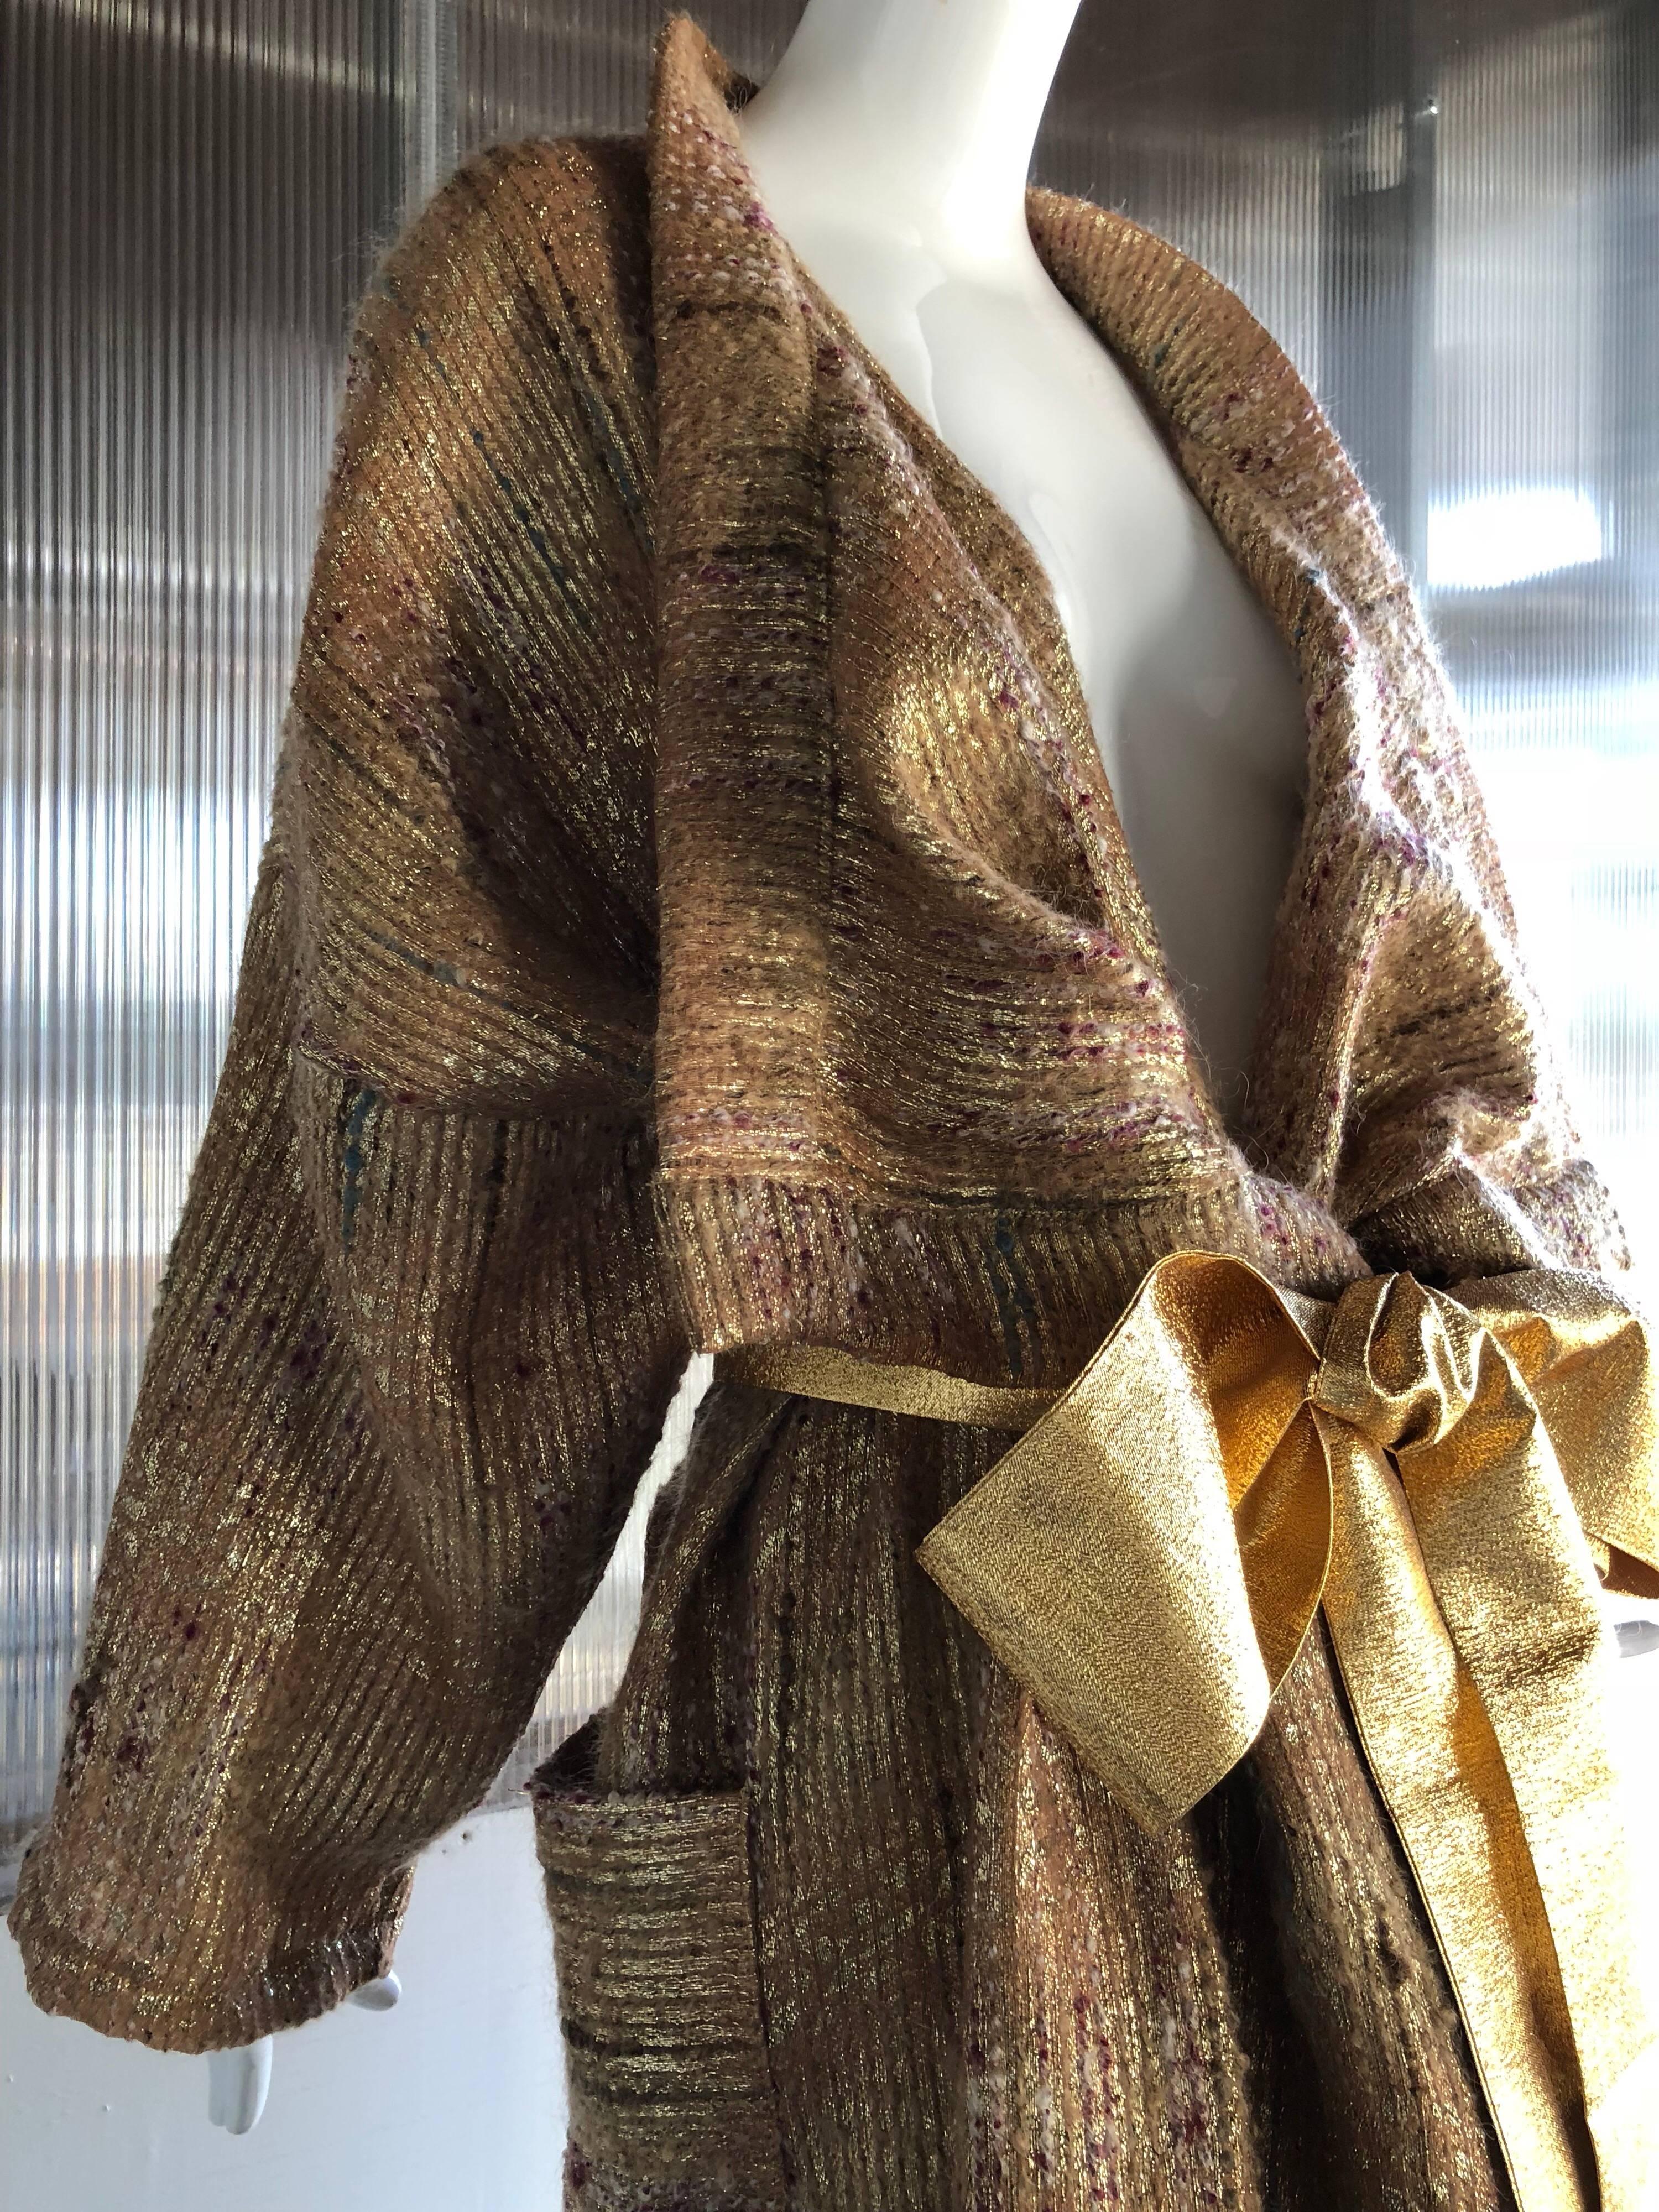 Custom-Made gold woven mohair duster with shawl collar, Dolman sleeves and pouch pockets.  Sold with coordinating gold lame obi belt. Unlined cocoon-like feel.